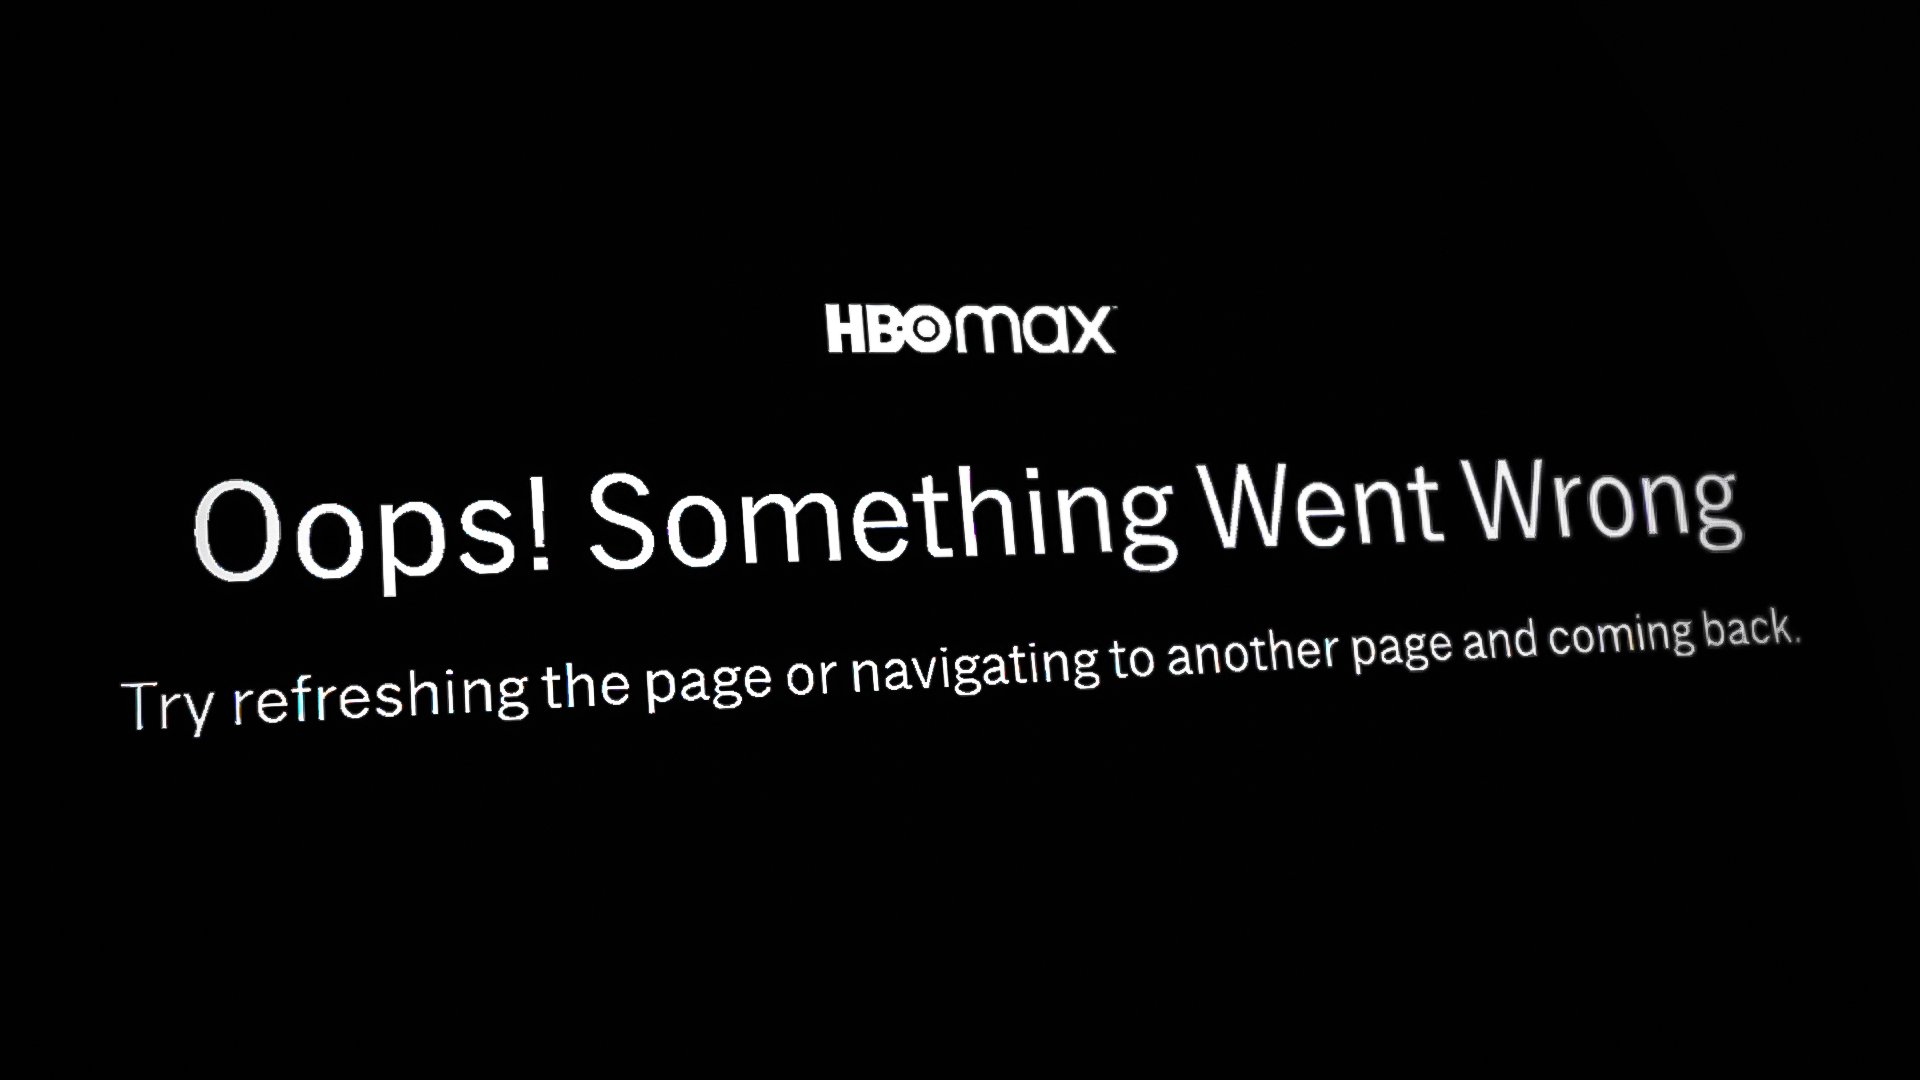 Oops Something Went Wrong on HBO Max